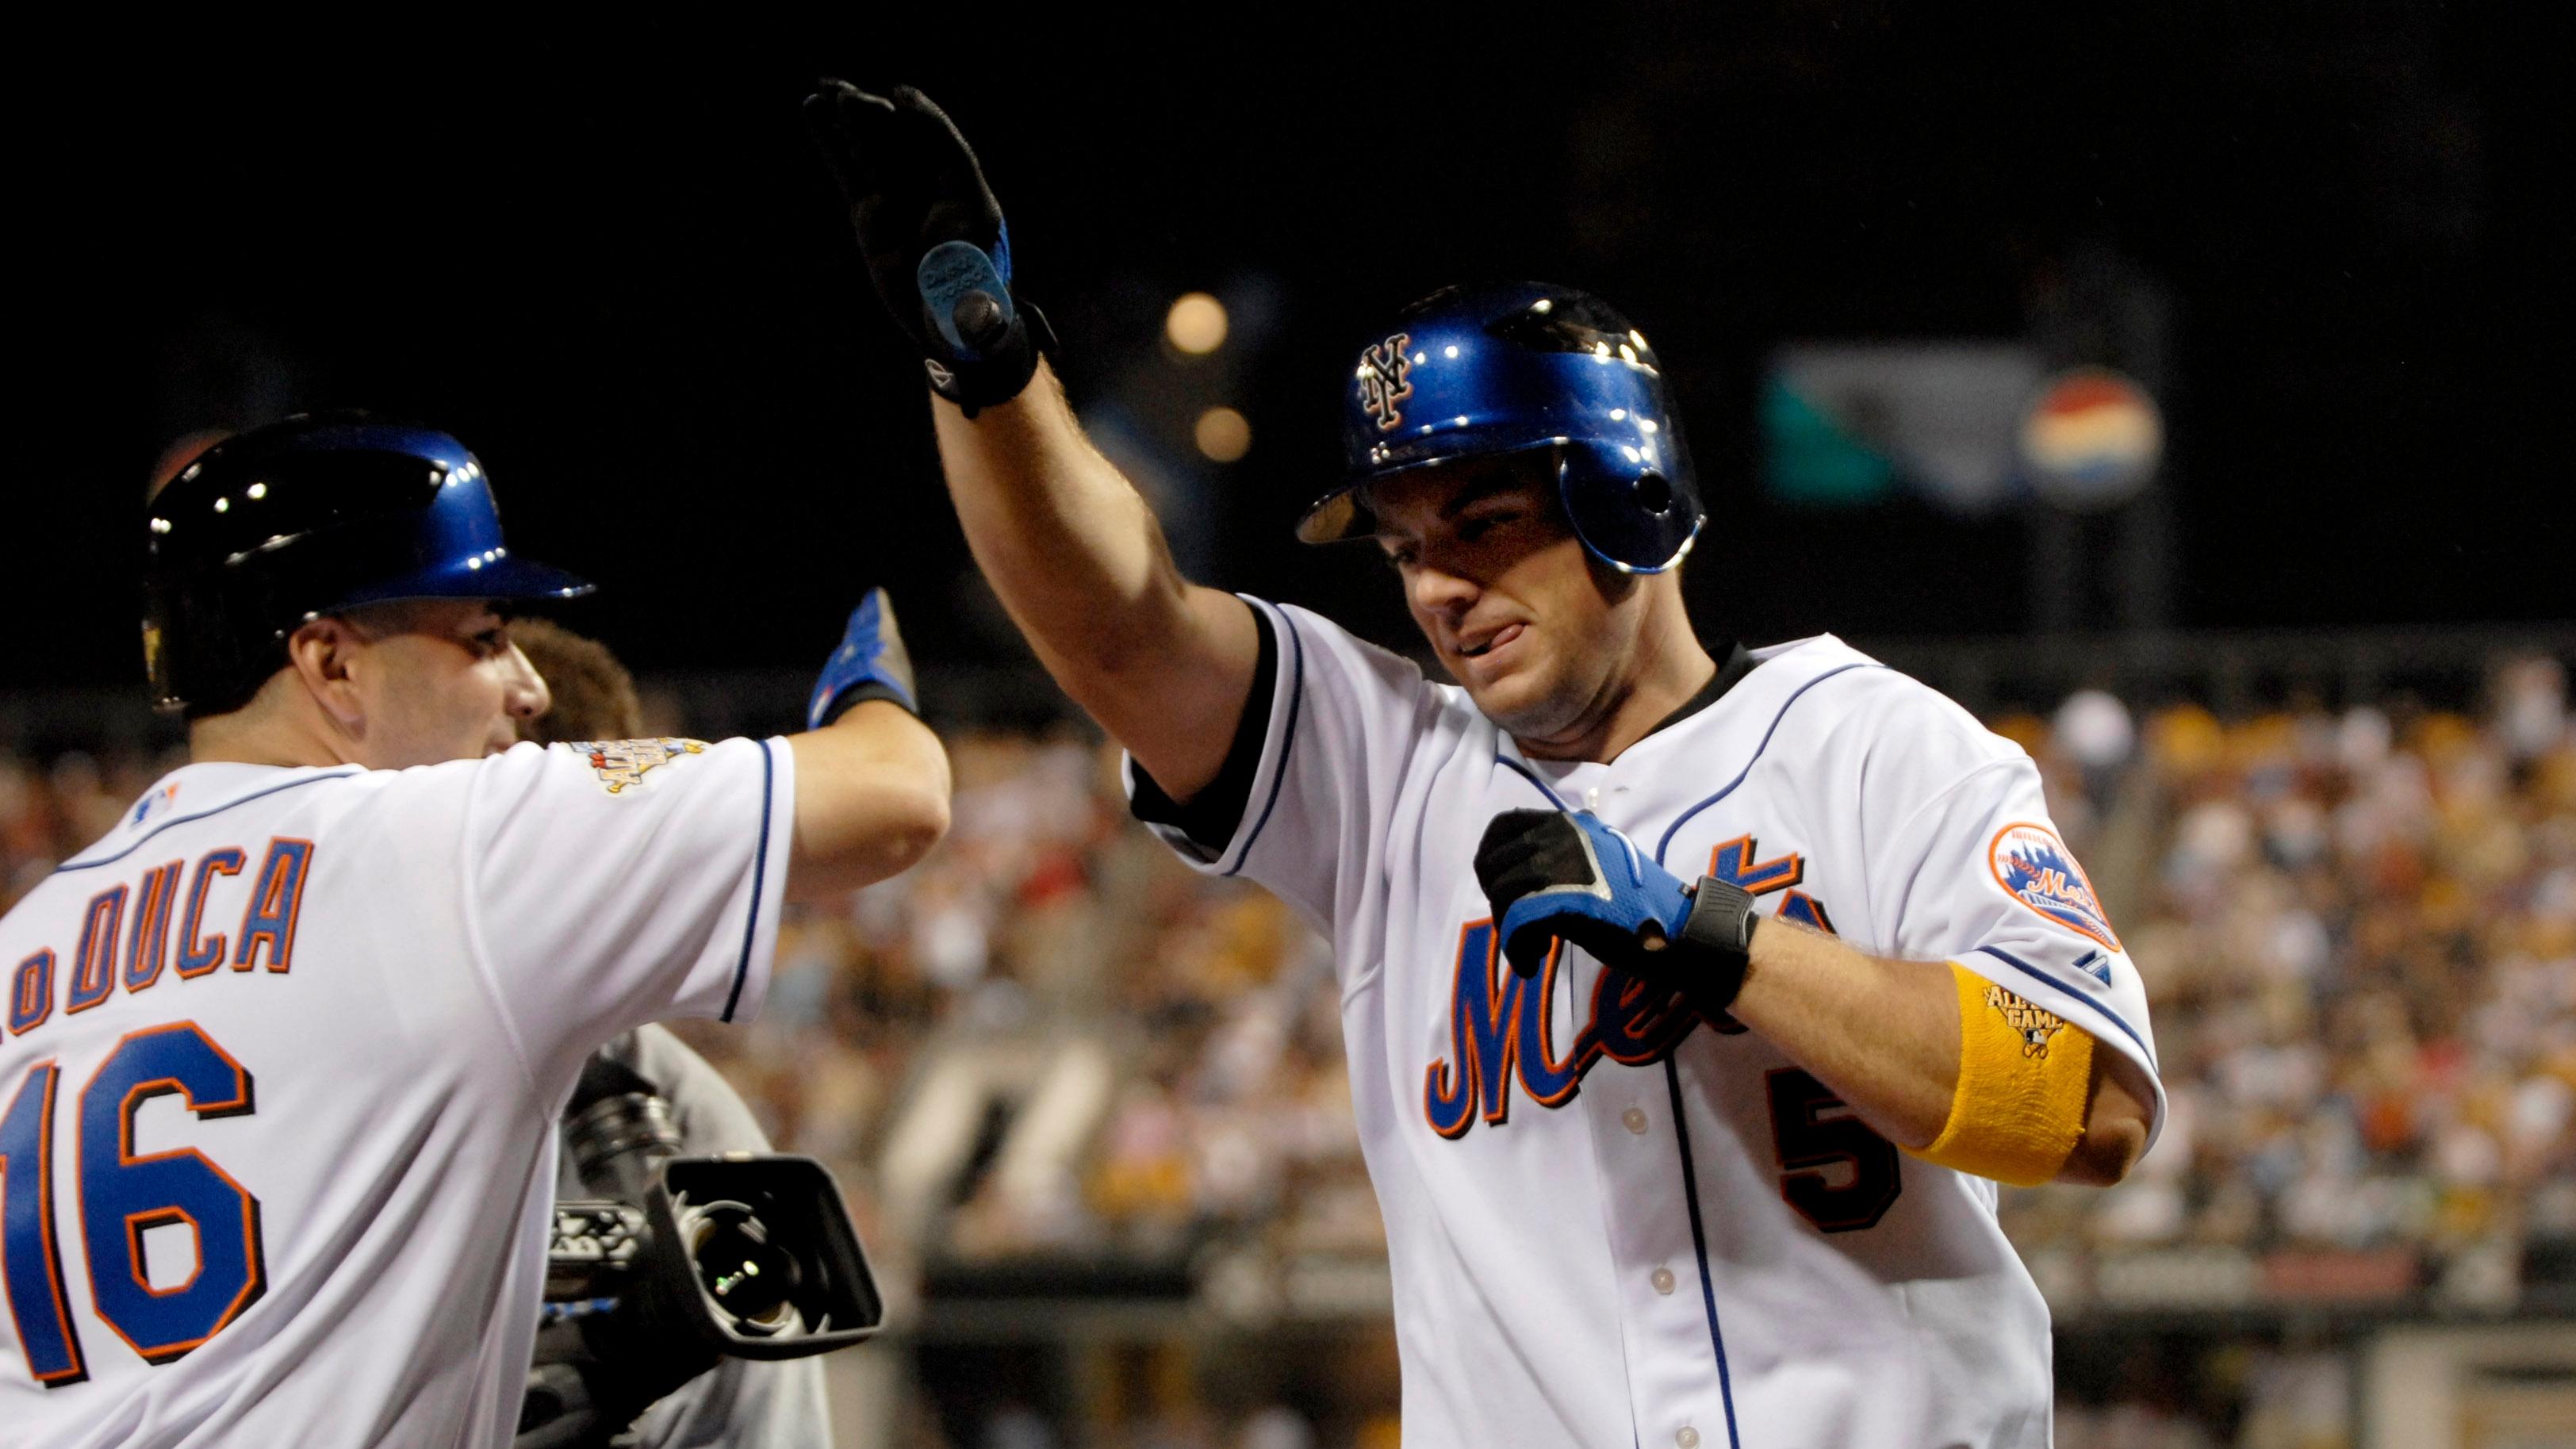 National League All-Star player David Wright celebrates with catcher Paul LoDuca after hitting a home run during the 2nd inning of the 2006 All-Star Game at PNC Park in Pittsburgh, PA. / Scott Rovak - USA TODAY Sports